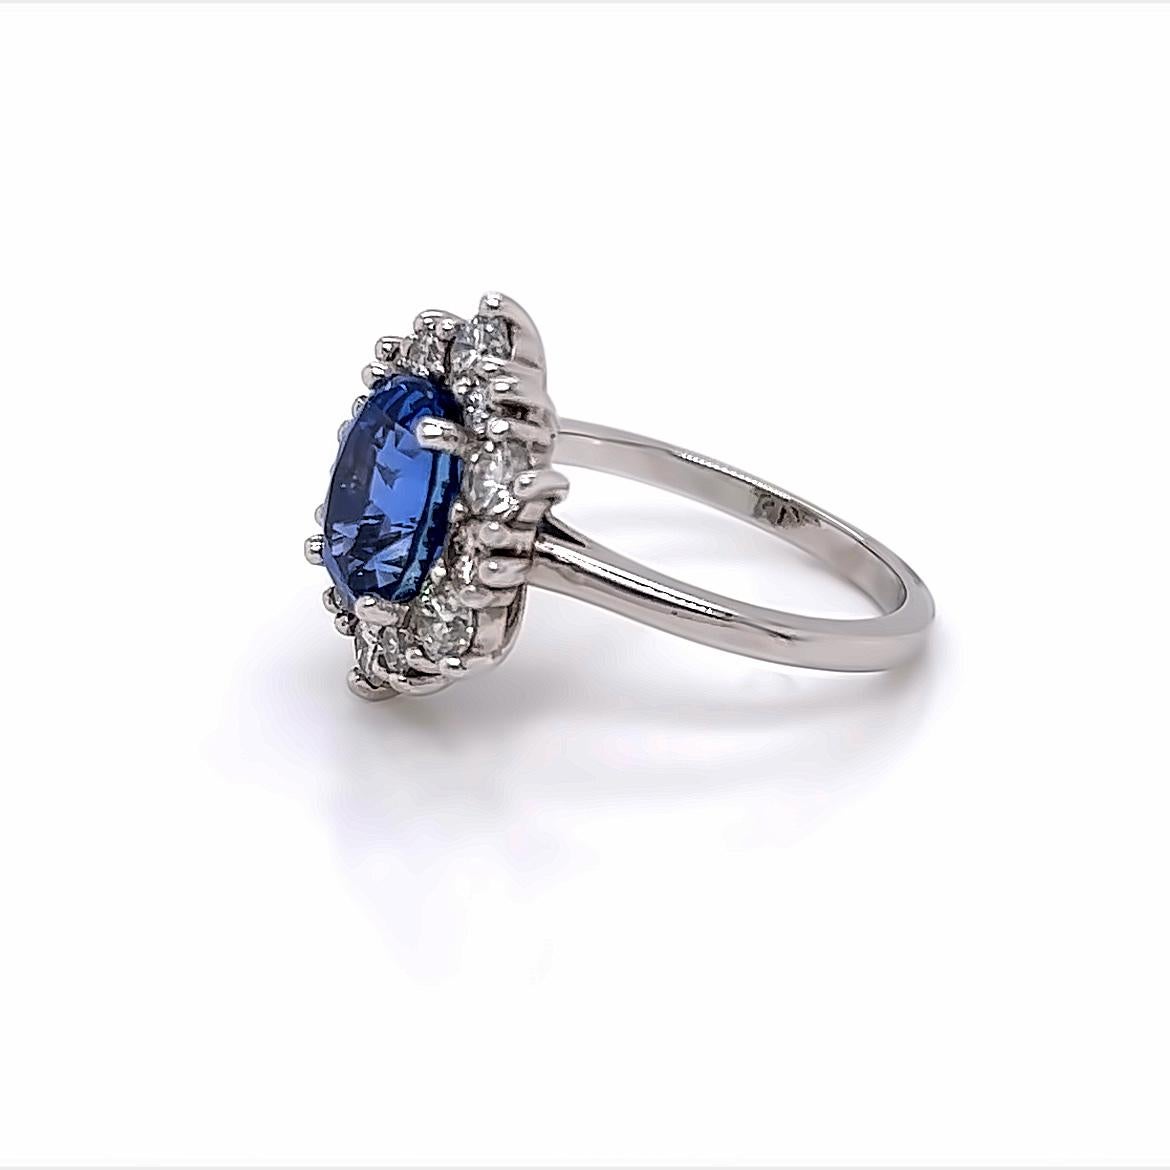 Women's 3.1 Carat Oval Blue Sapphire and Diamond Ring in Platinum For Sale